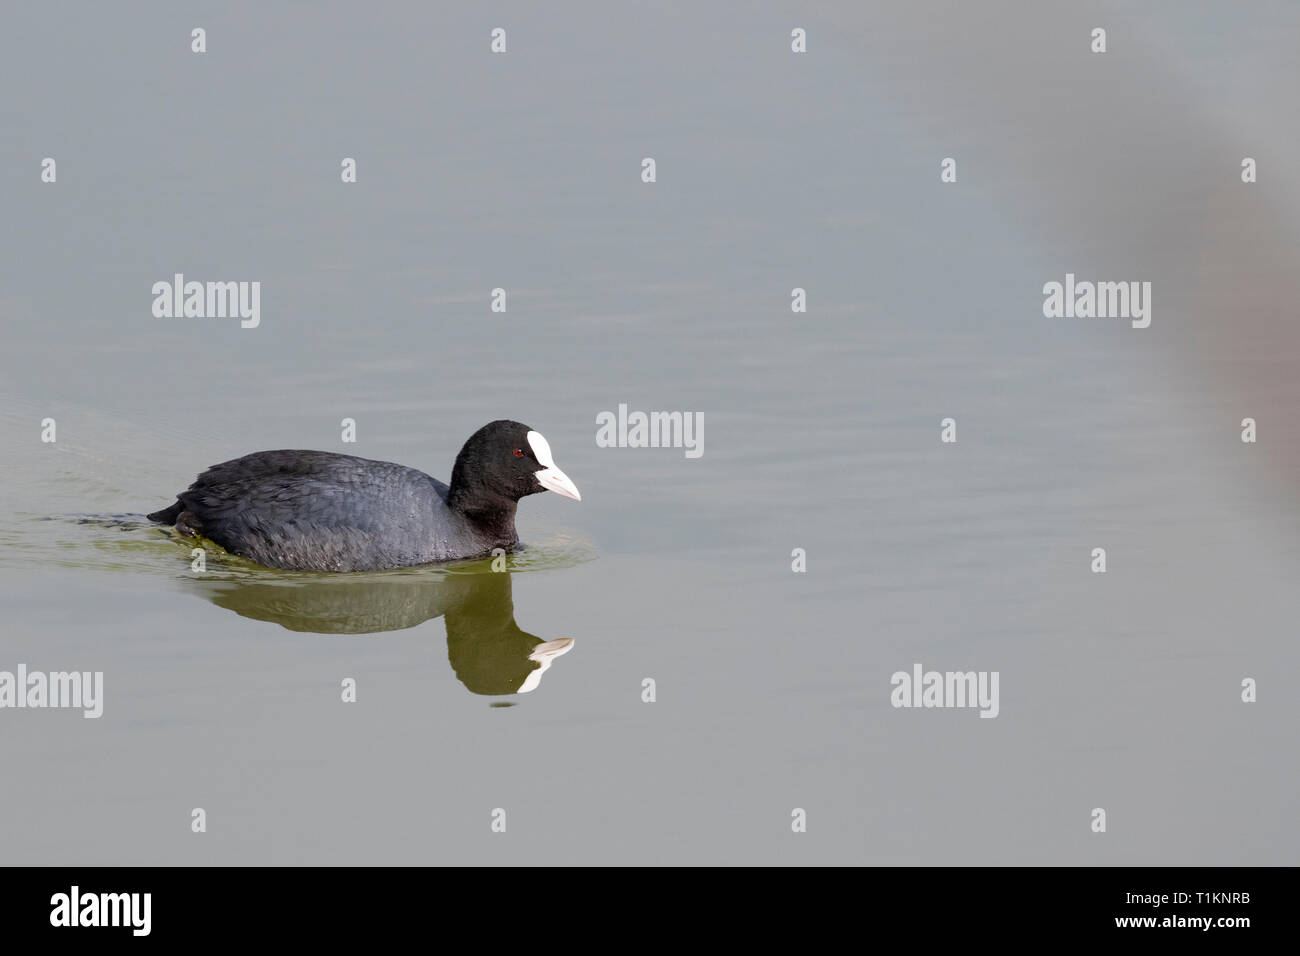 Common Coot (Fulica atra) on water. Natural Areas of the Llobregat Delta. Barcelona province. Catalonia. Spain. Stock Photo